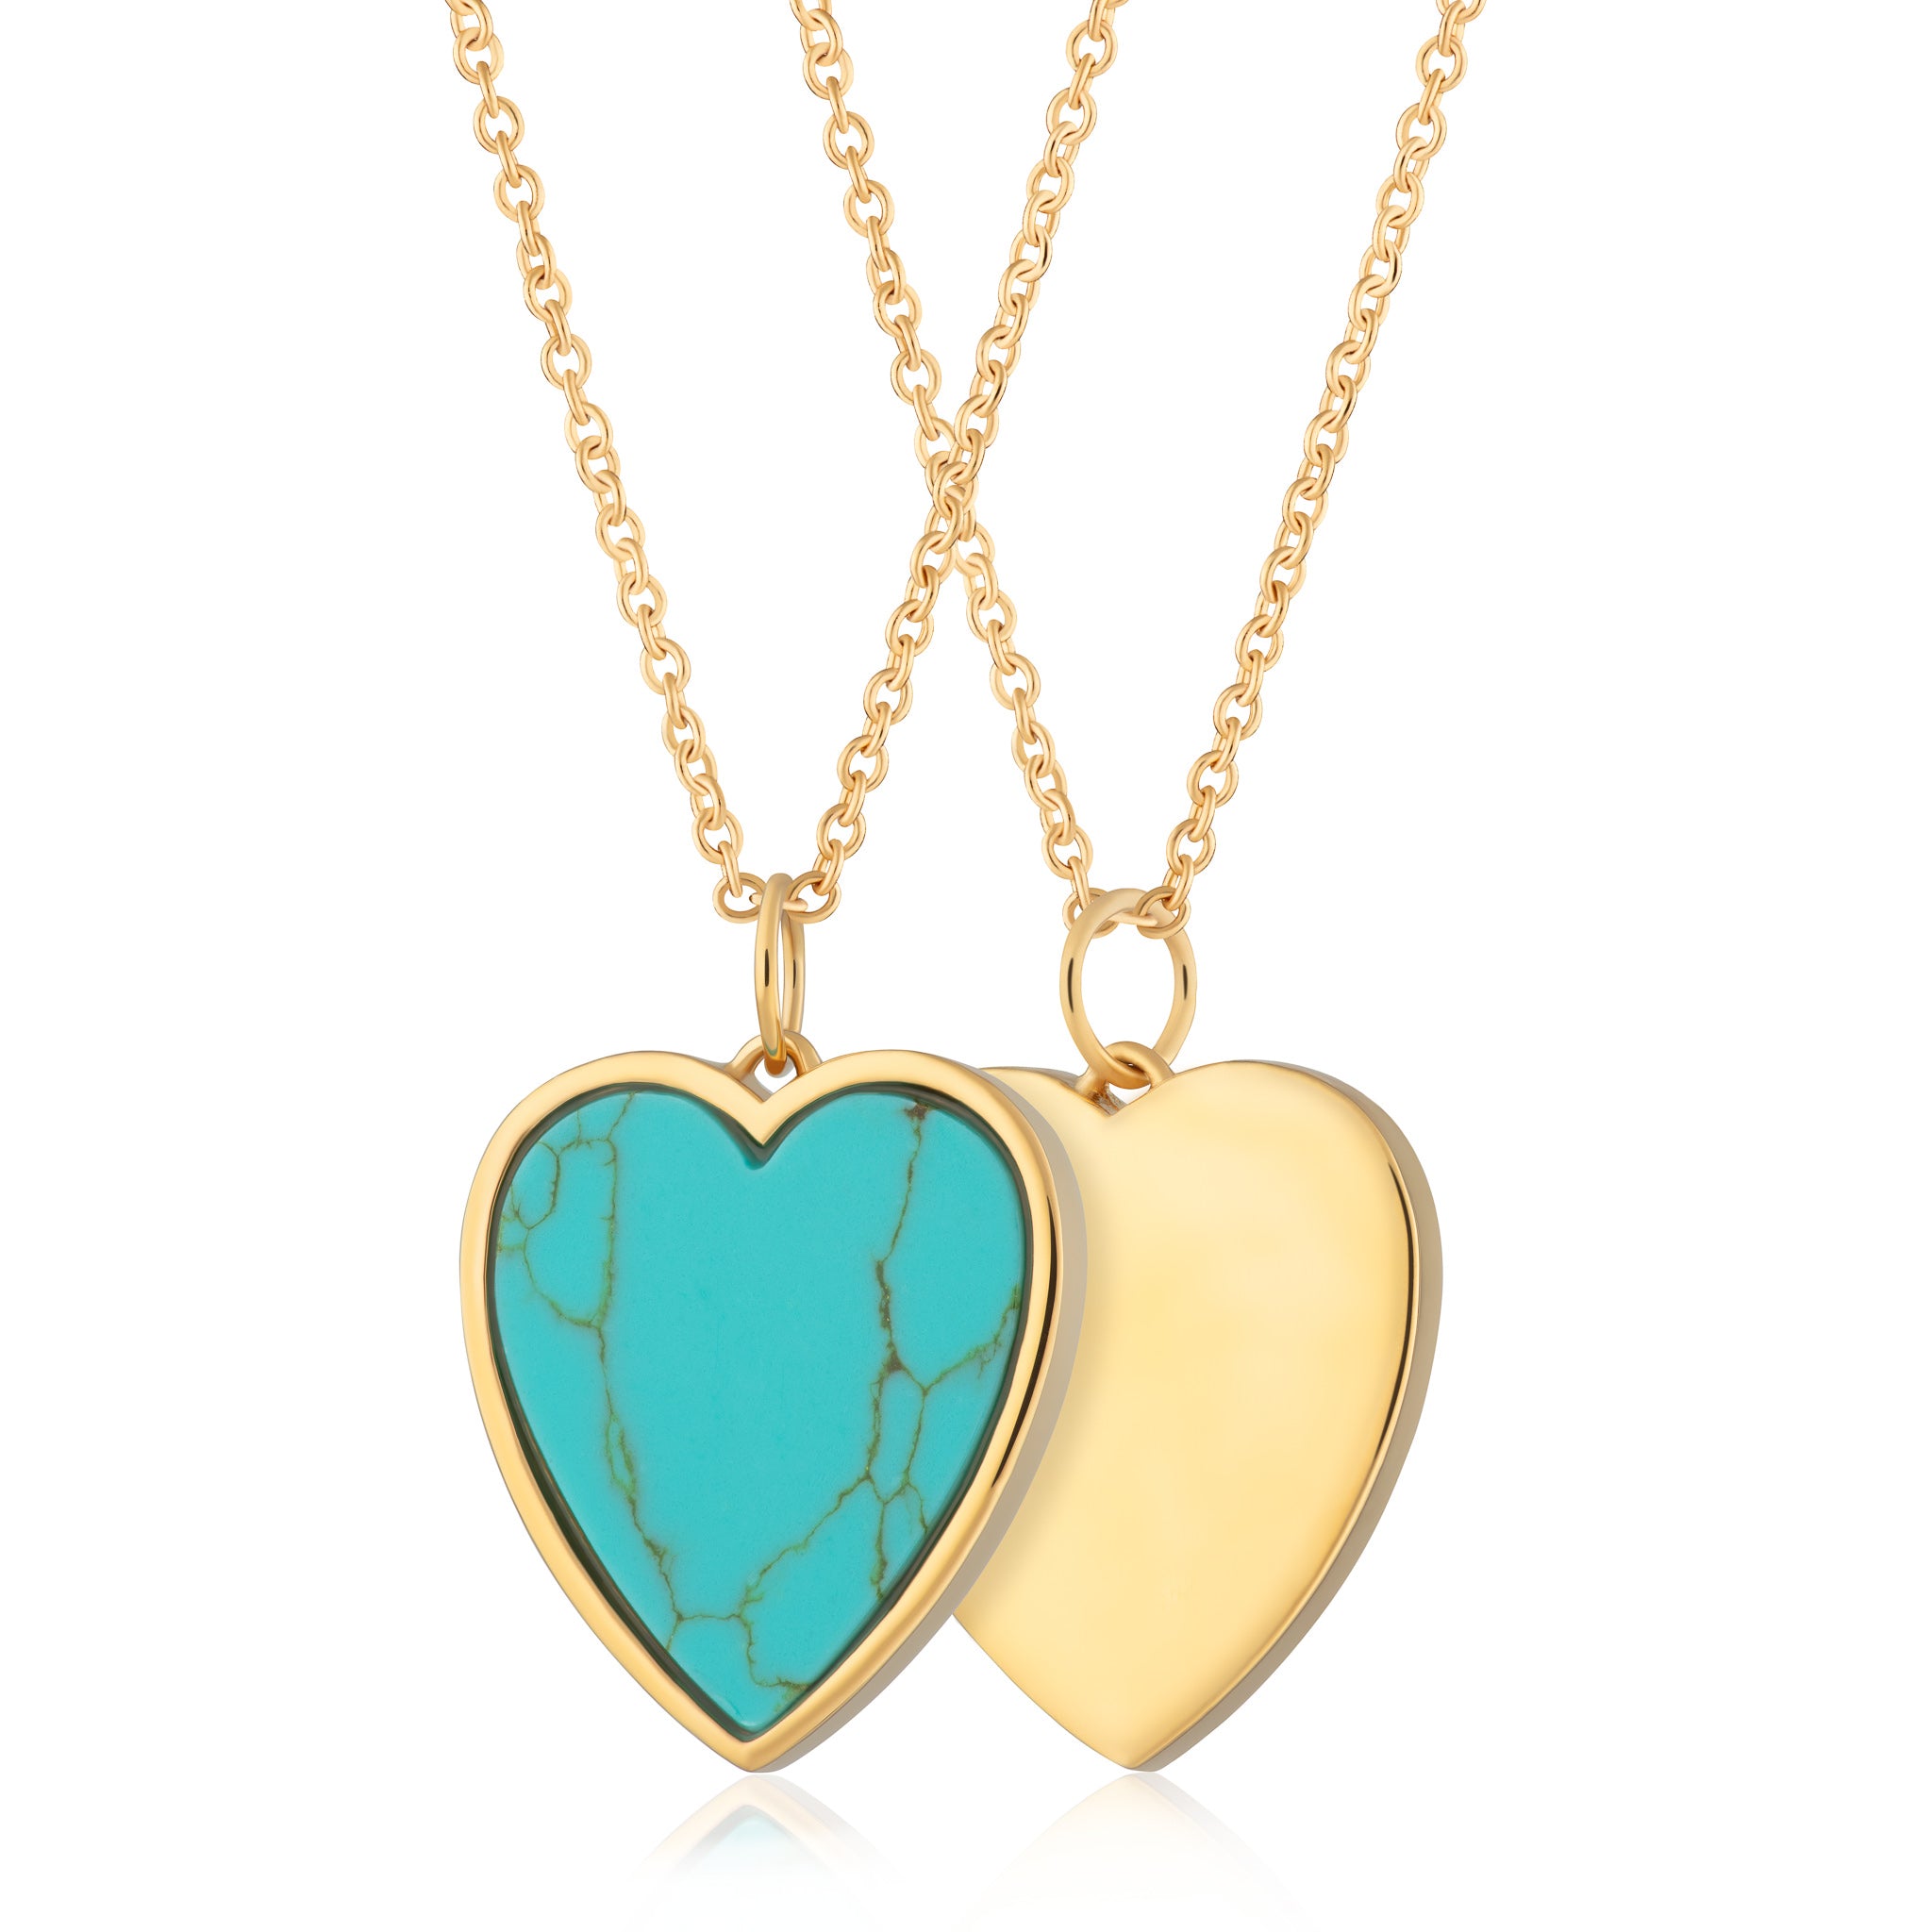 Turquoise Heart Necklace with Slider Clasp